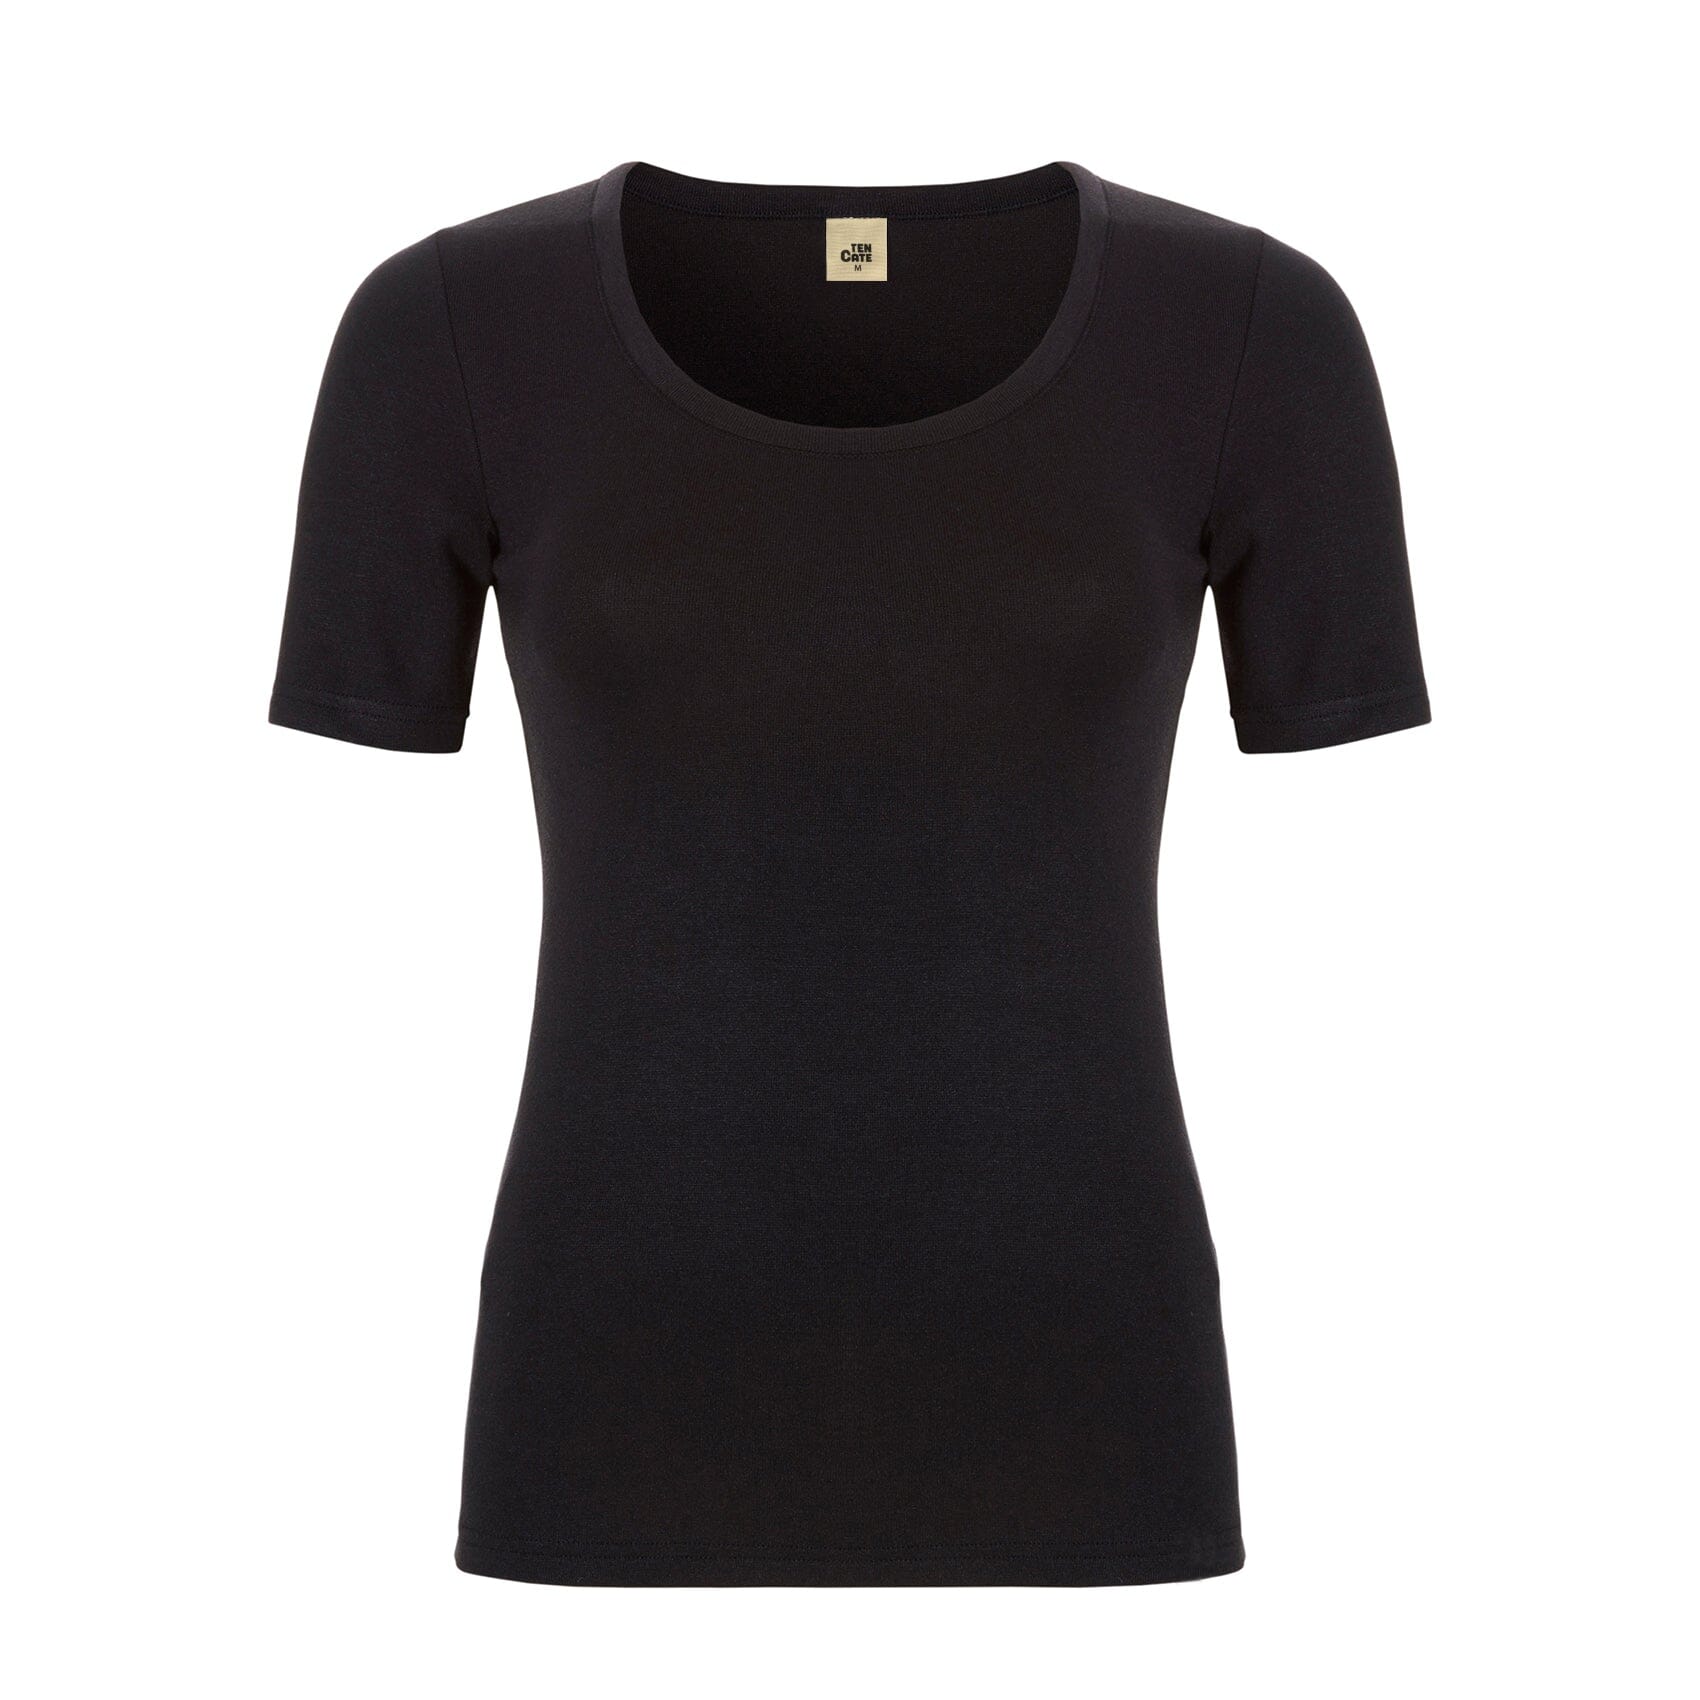 Ten Cate - 30239 - Thermo T-shirt Dames - Black Thermo Ondergoed Ten Cate 